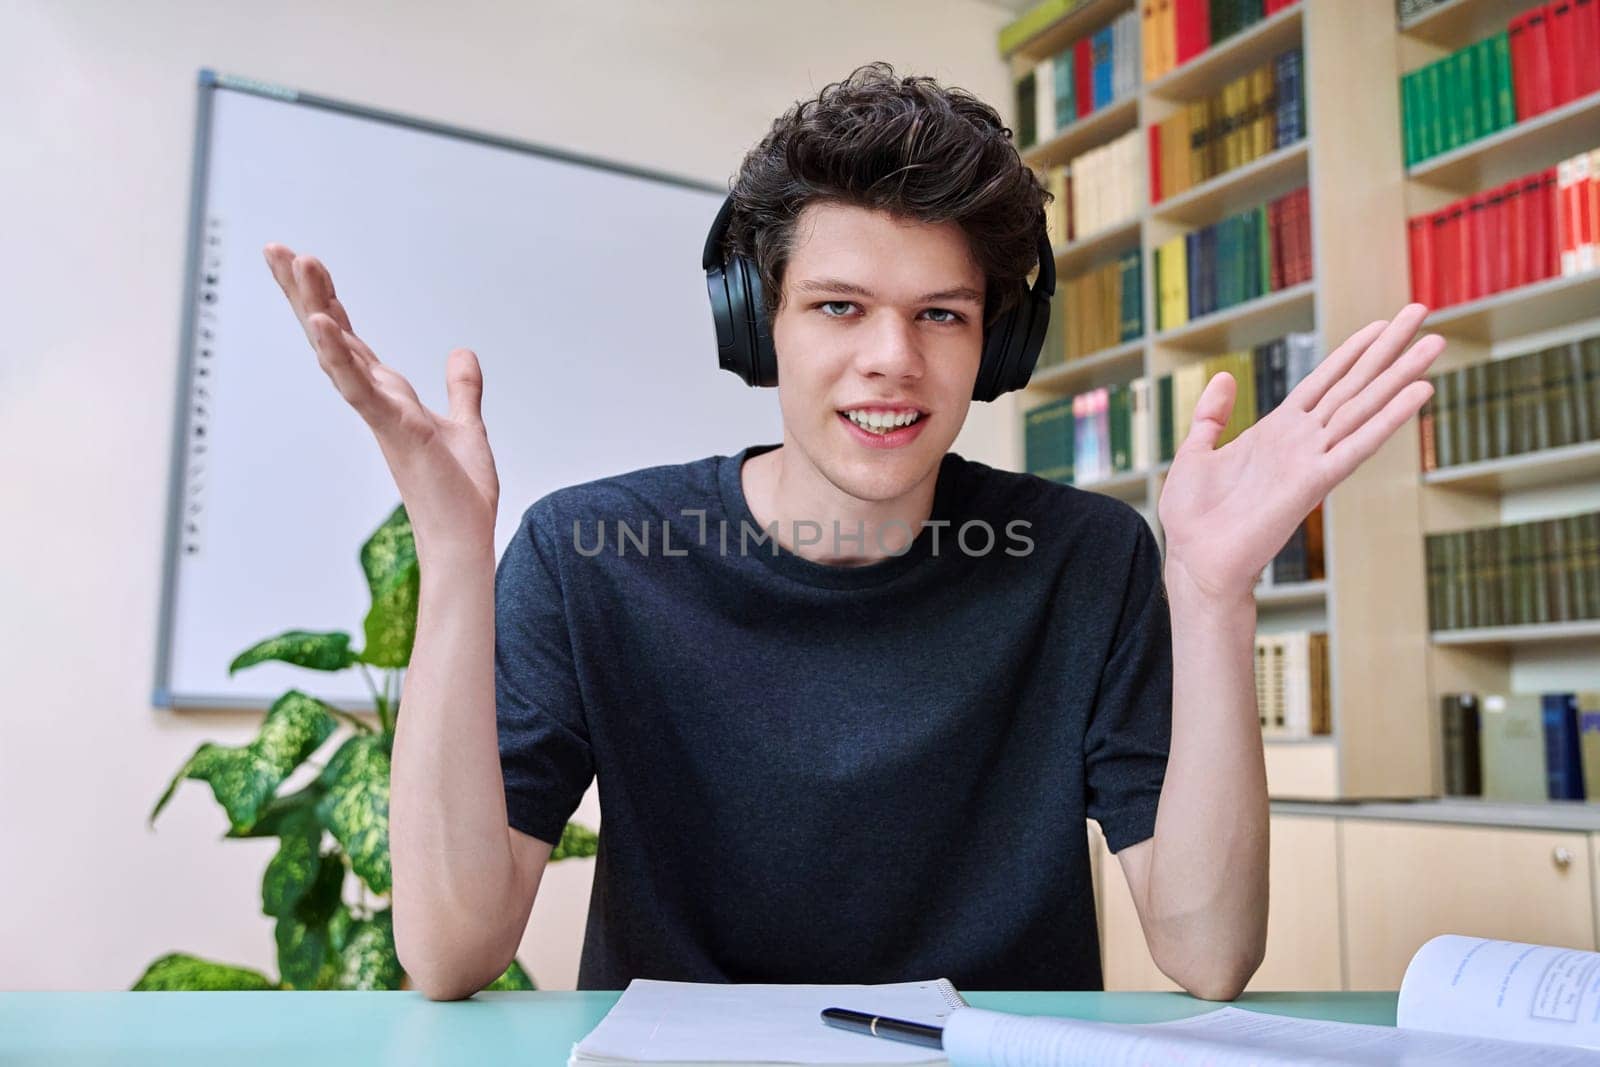 Web cam portrait of college student guy in headphones looking talking to camera in educational building library classroom. Video call chat conference, online lesson exam test, technology education